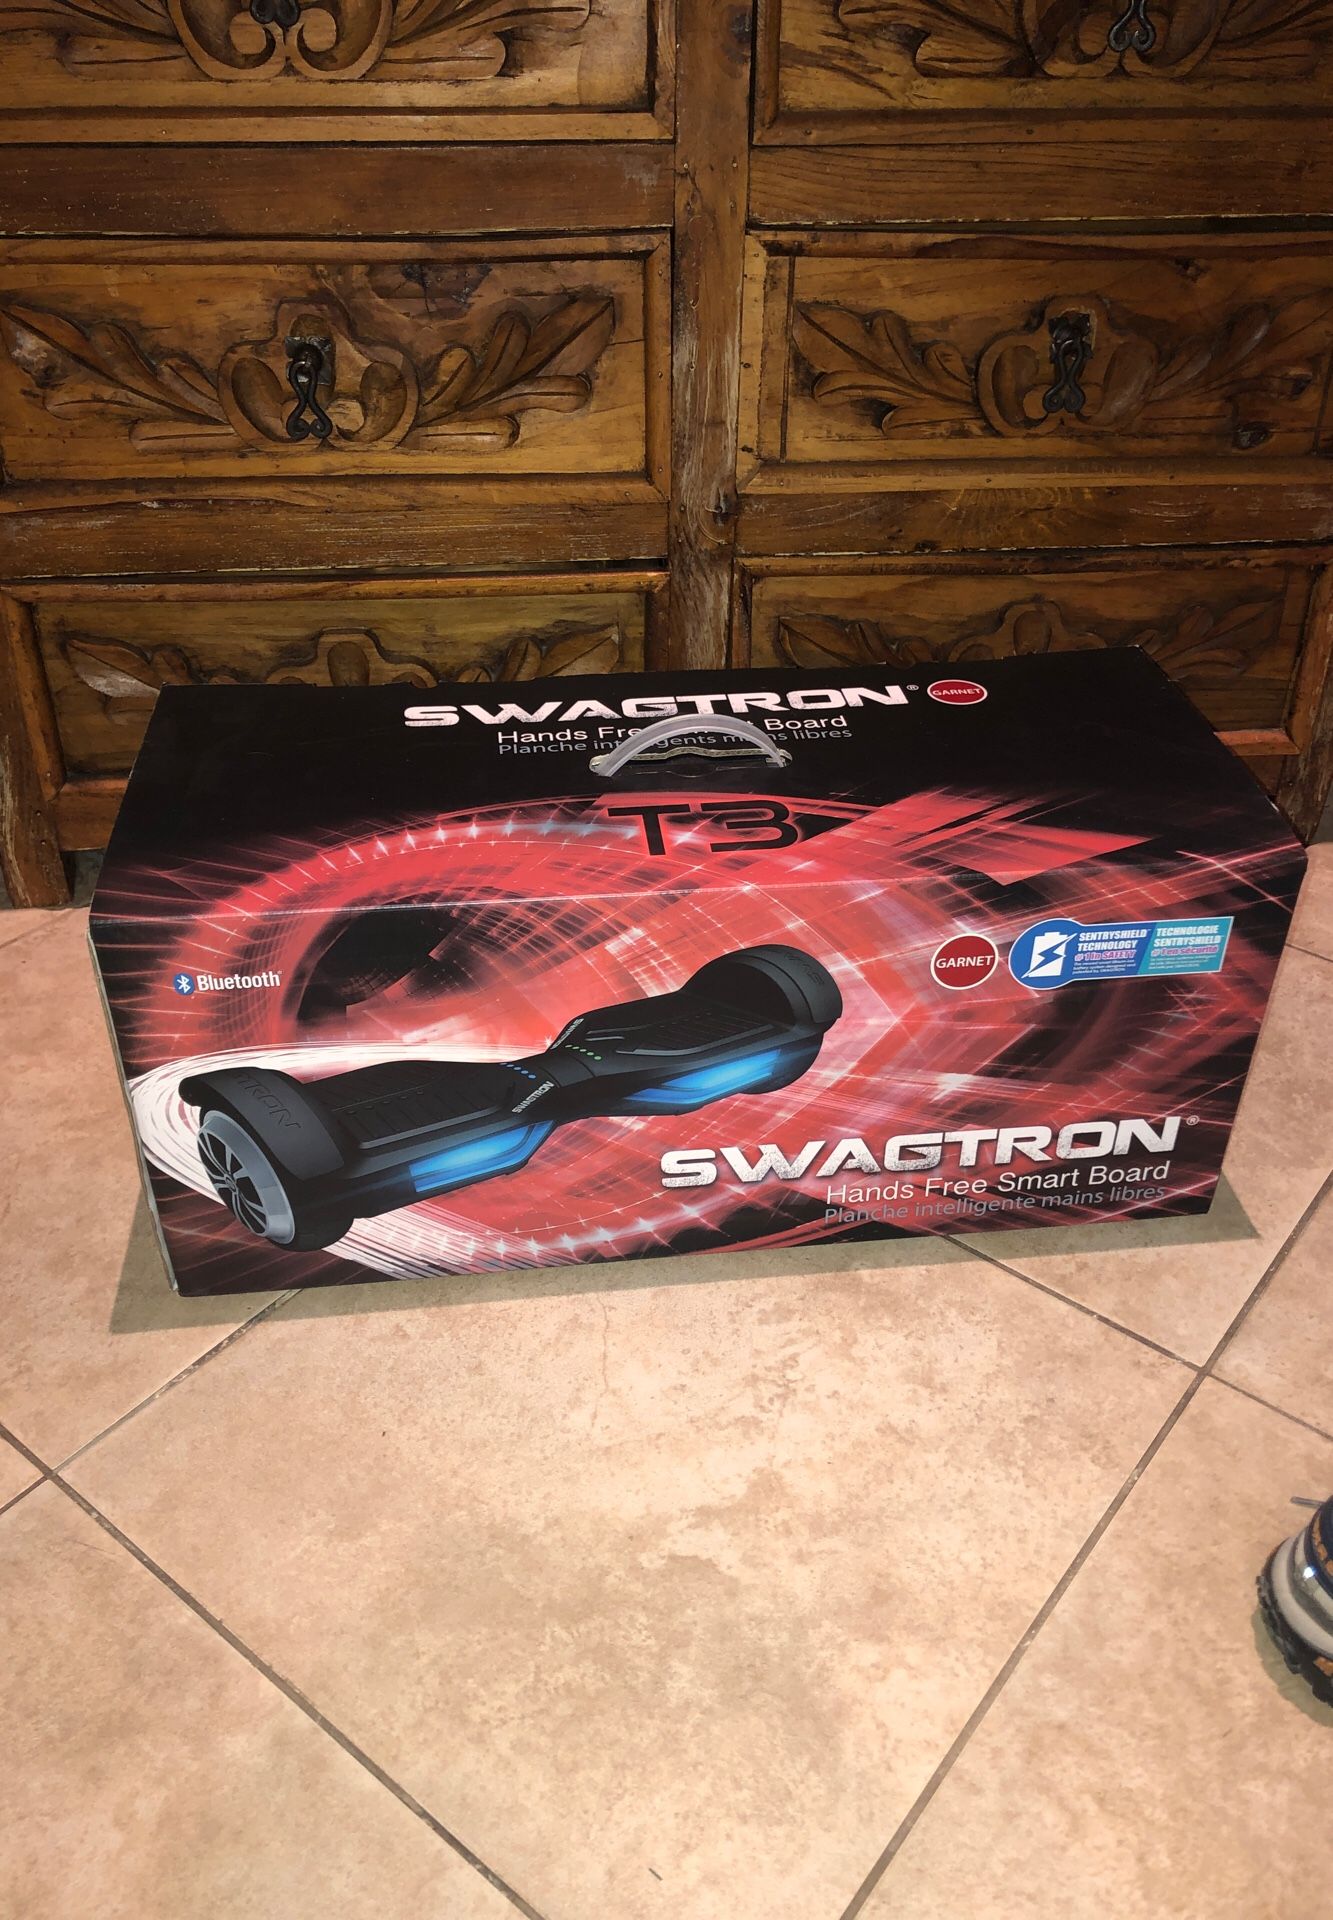 Swagtron t3 hoverboard